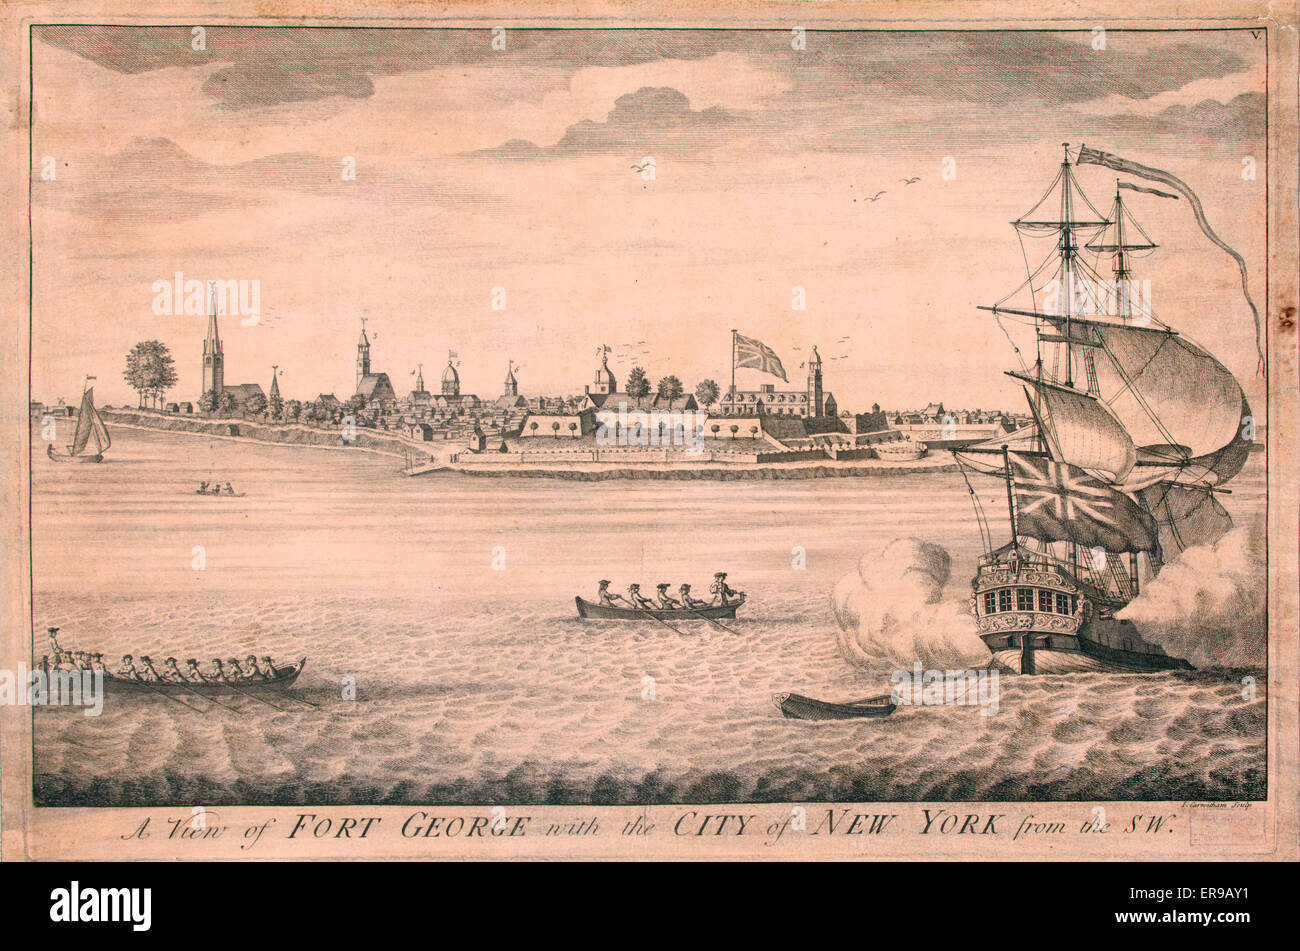 A view of Fort George with the City of New York from the SW. Date 1736. Stock Photo